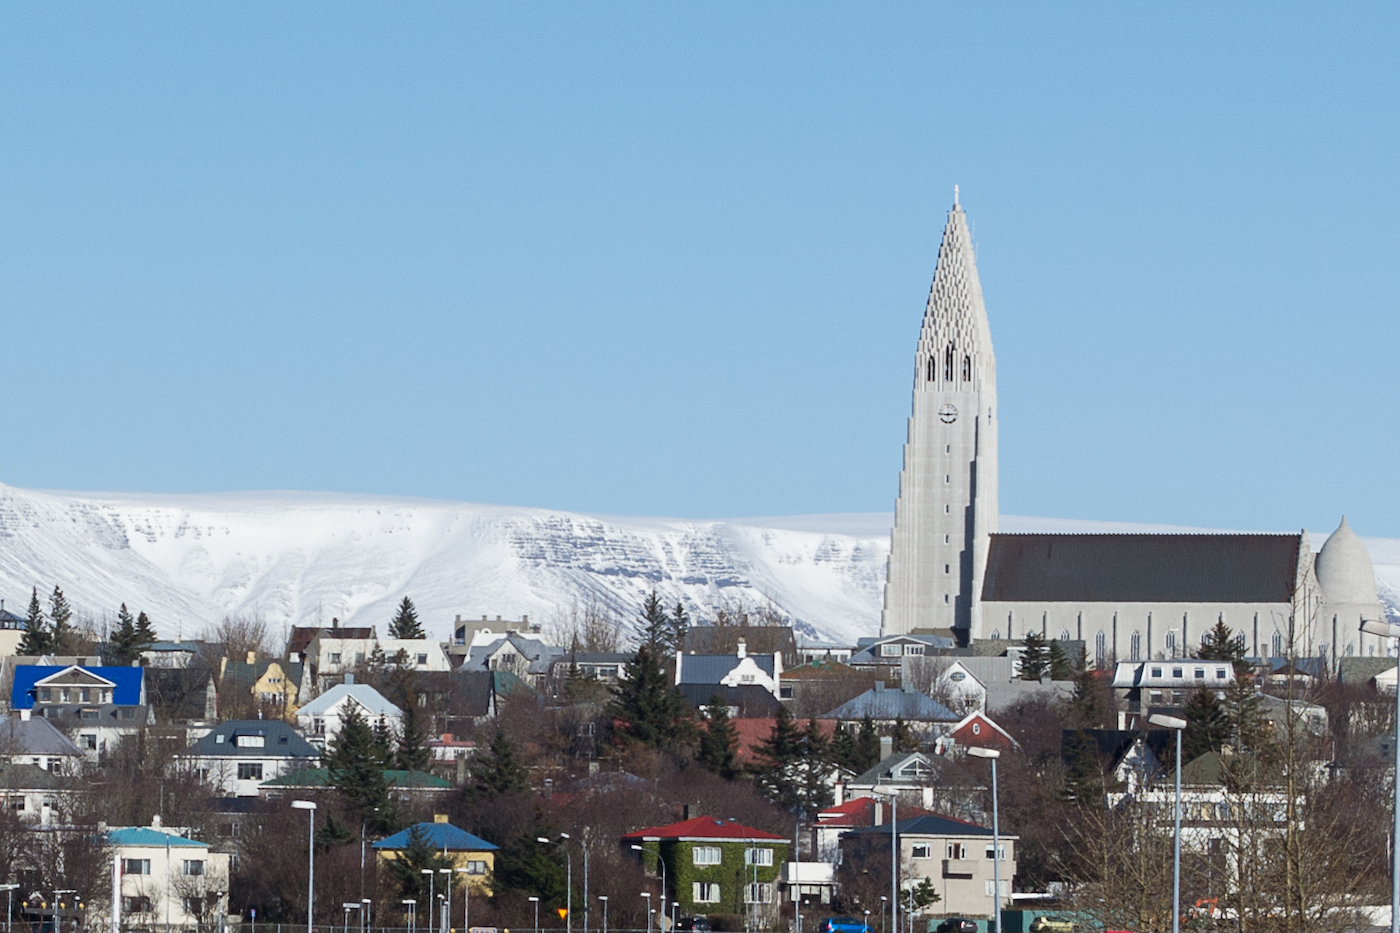 The town of Reykjavik, Iceland